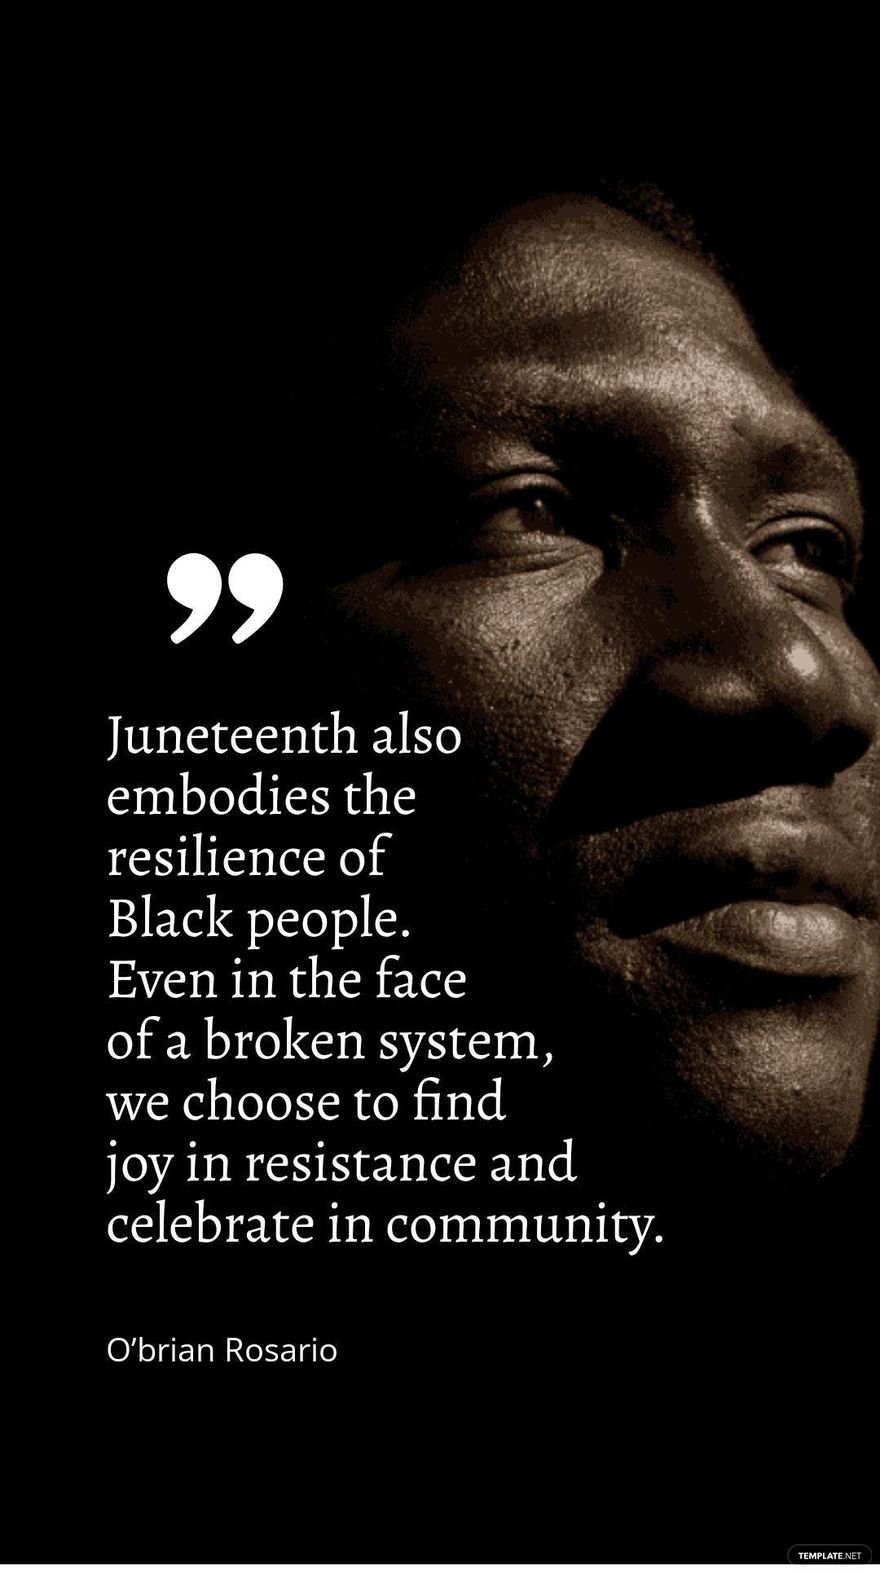 O’brian Rosario - Juneteenth also embodies the resilience of Black people. Even in the face of a broken system, we choose to find joy in resistance and celebrate in community.